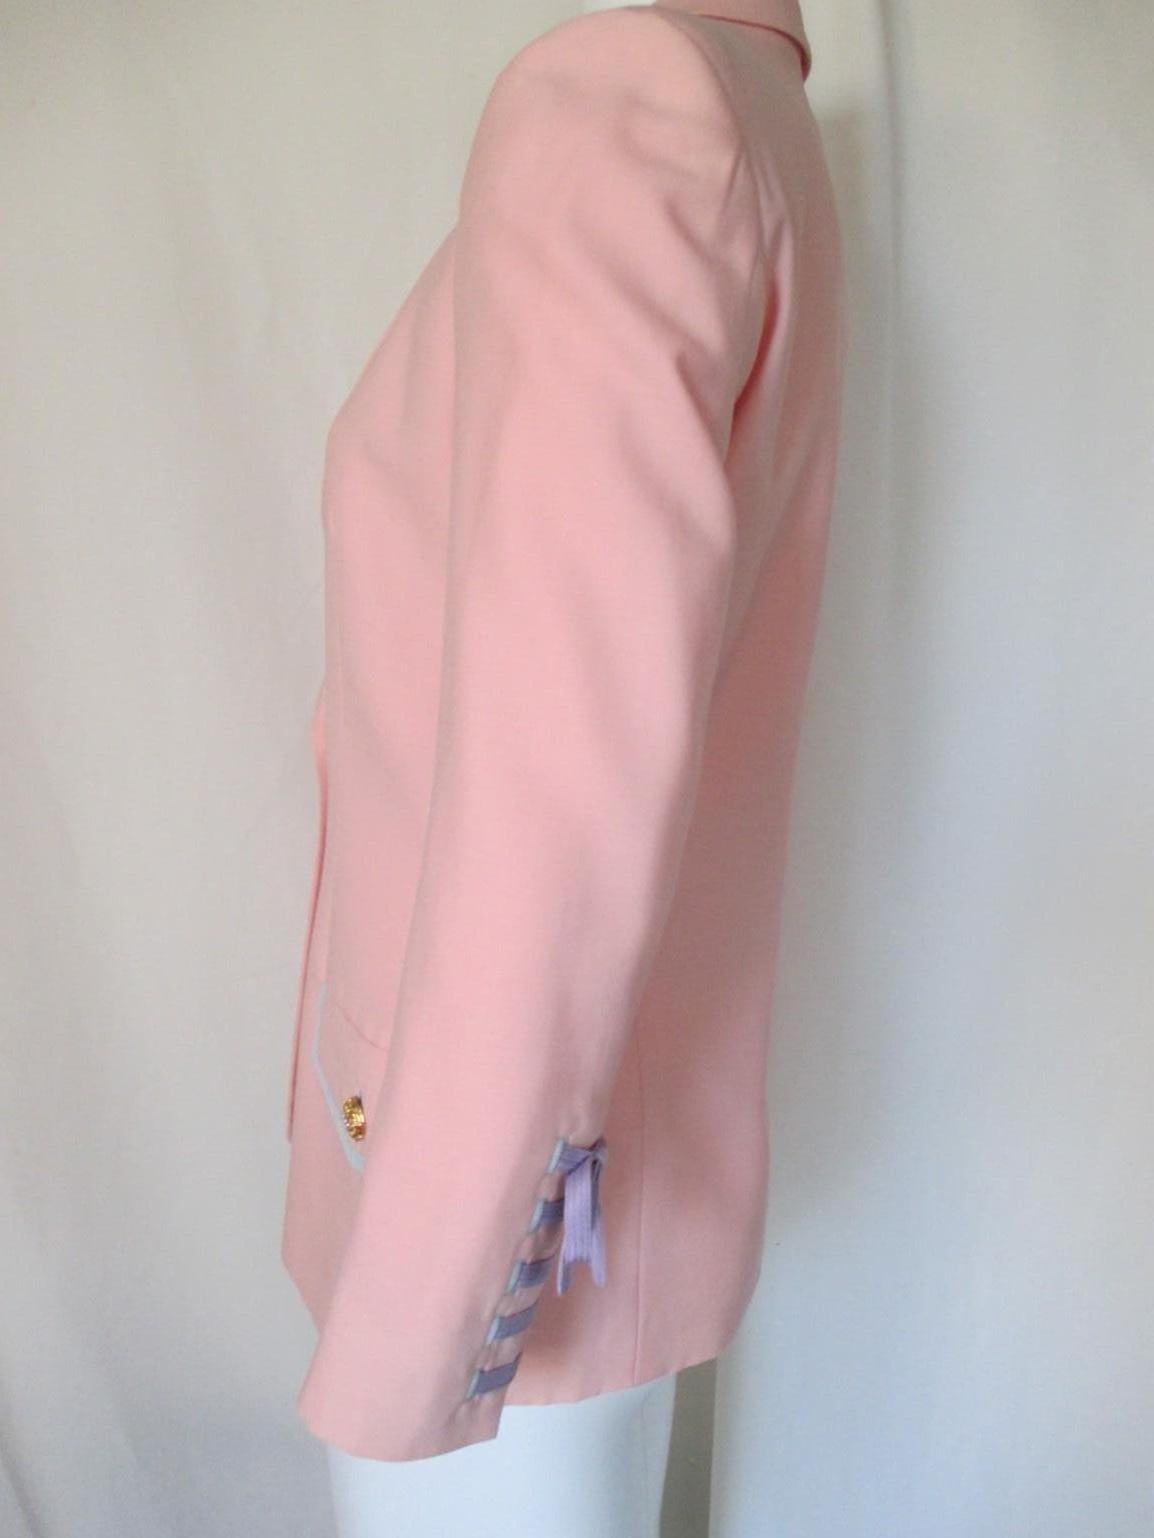 COLLECTORS ITEM- documented
An iconic Gianni Versace Couture jacket from spring 1992 ready to wear show, one of Versace's most important and sought after collections.

Material: 15 % silk/ 85% linen 
Color: salmon/pink with blue and yellow details